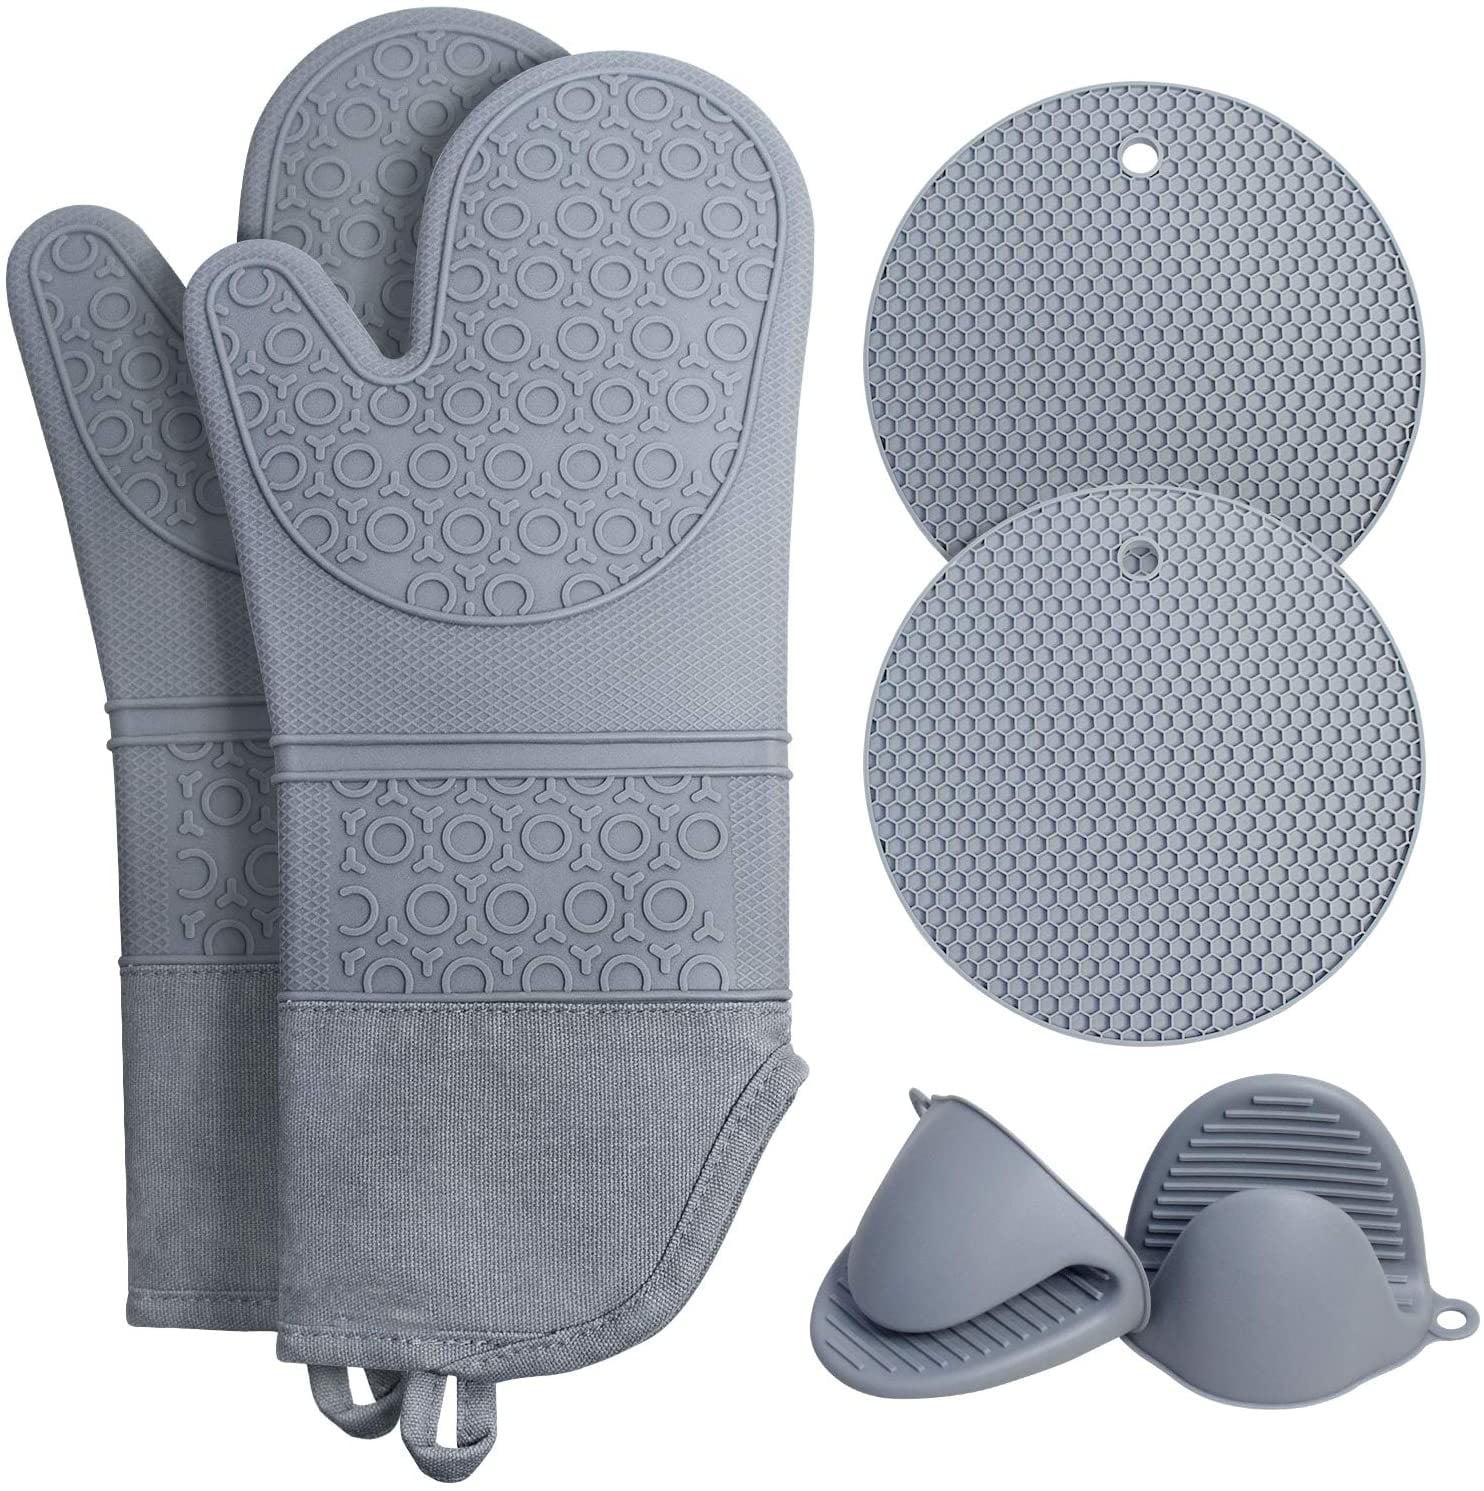 ARCLIBER Oven Mitts 1 Pair of Quilted Cotton Lining Heat Resistant Kitchen Gloves,Flame Oven Mitt Set,Grey